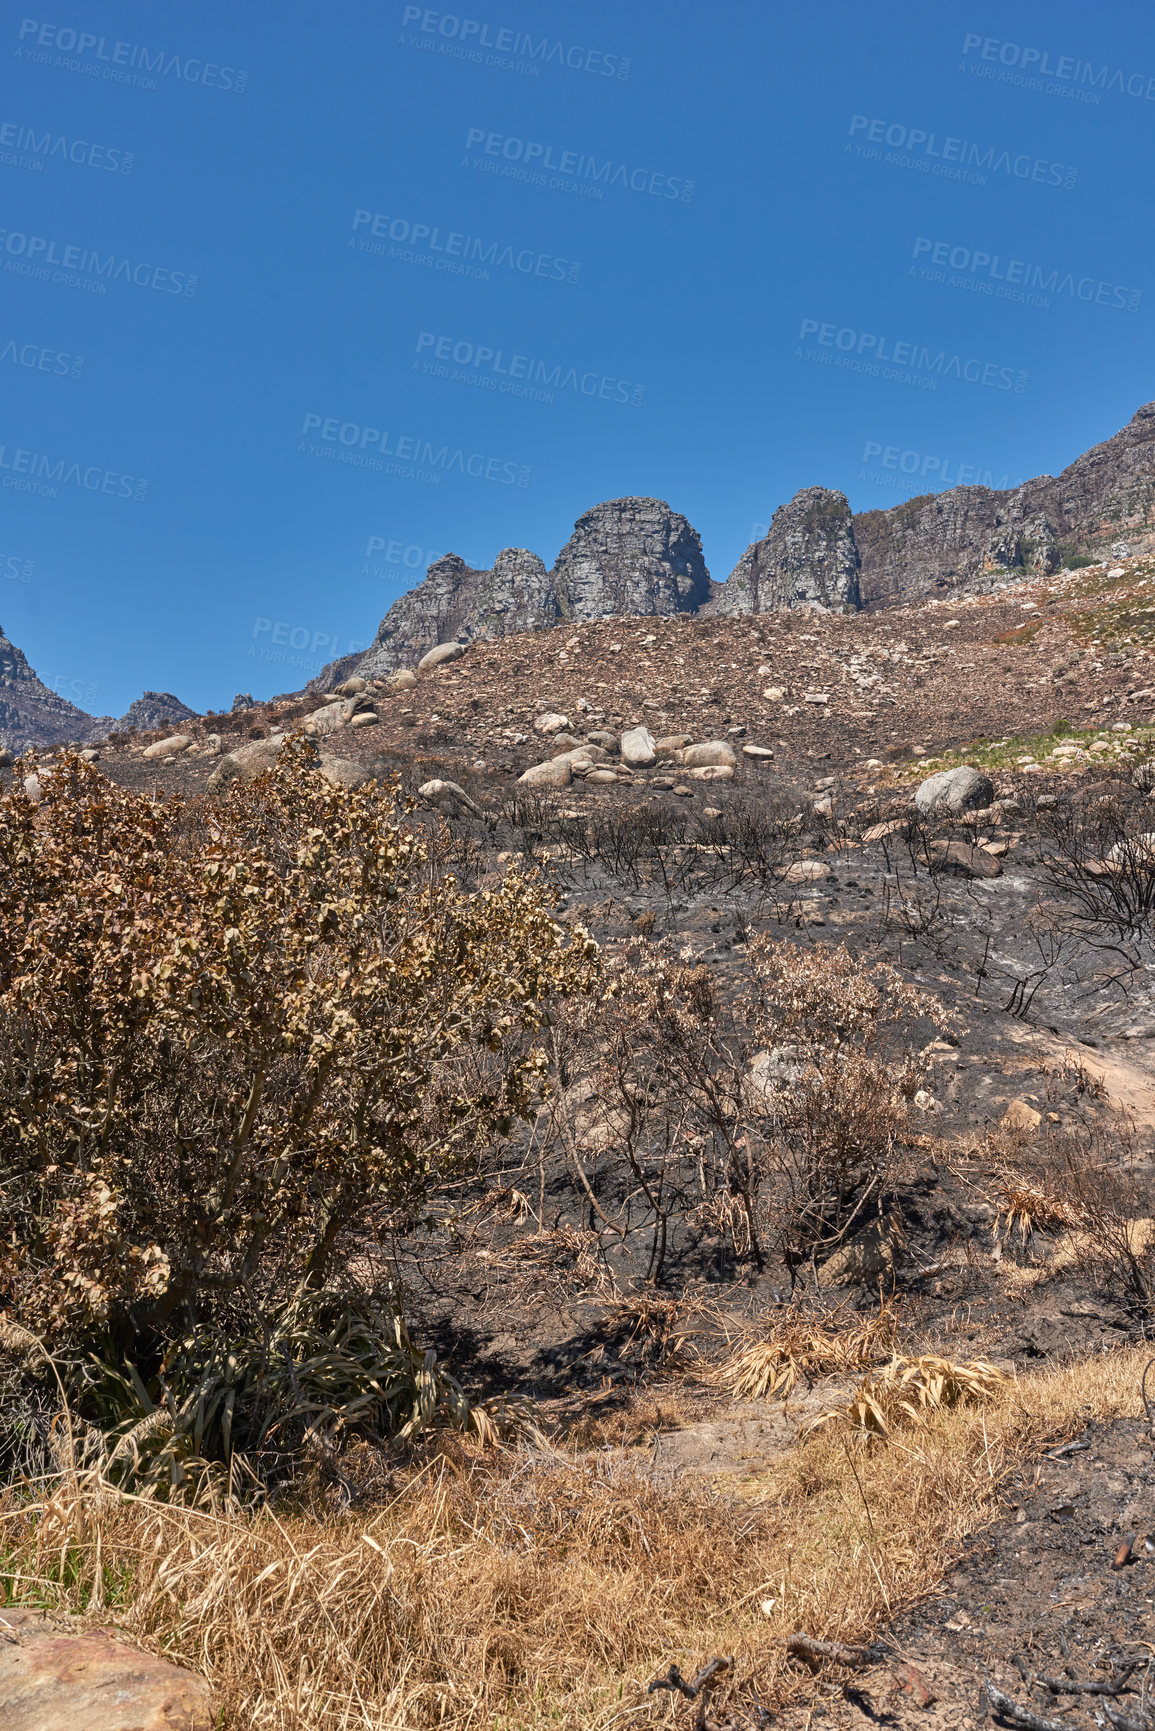 Buy stock photo The aftermath of a natural mountain landscape destroyed by wildfire destruction on table mountain in Cape Town, South Africa. Burnt Bushes, shrubs, plants, and vegetation after a fire disaster 